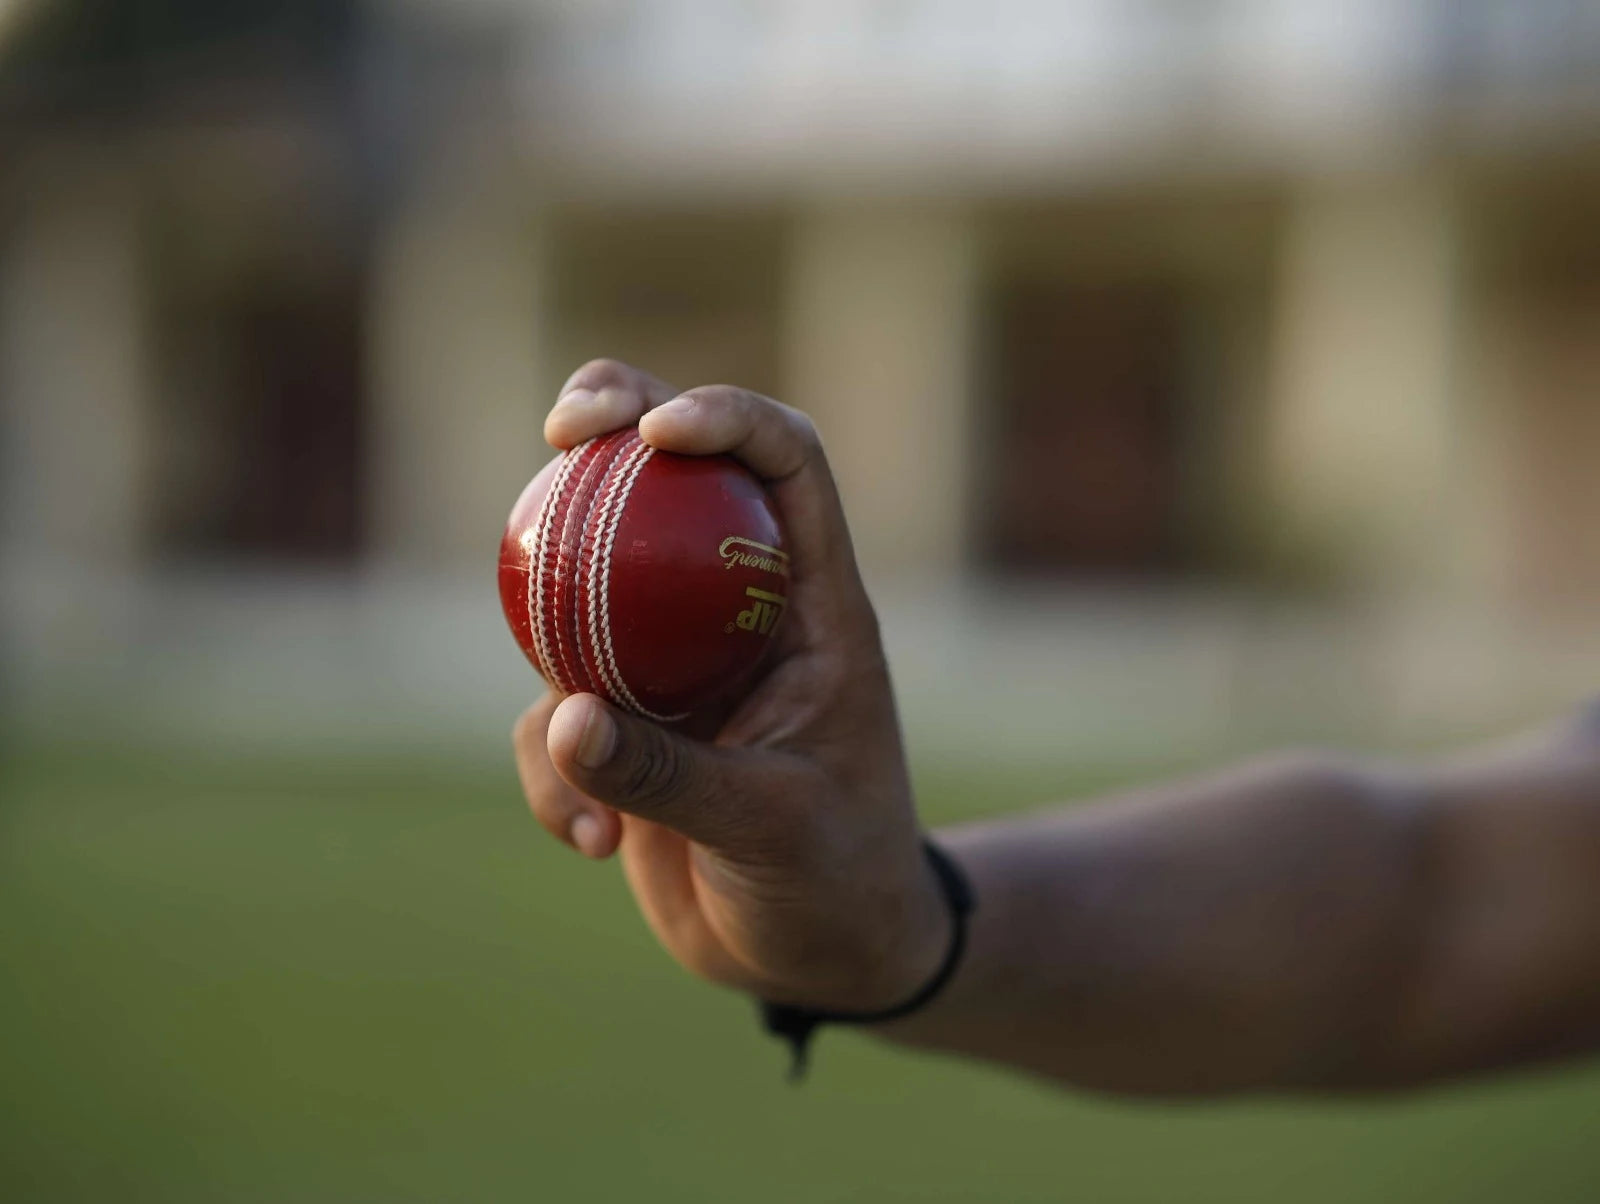 How to swing a cricket ball…oh, and teach – LEARNING DESIGN by Paul G Moss